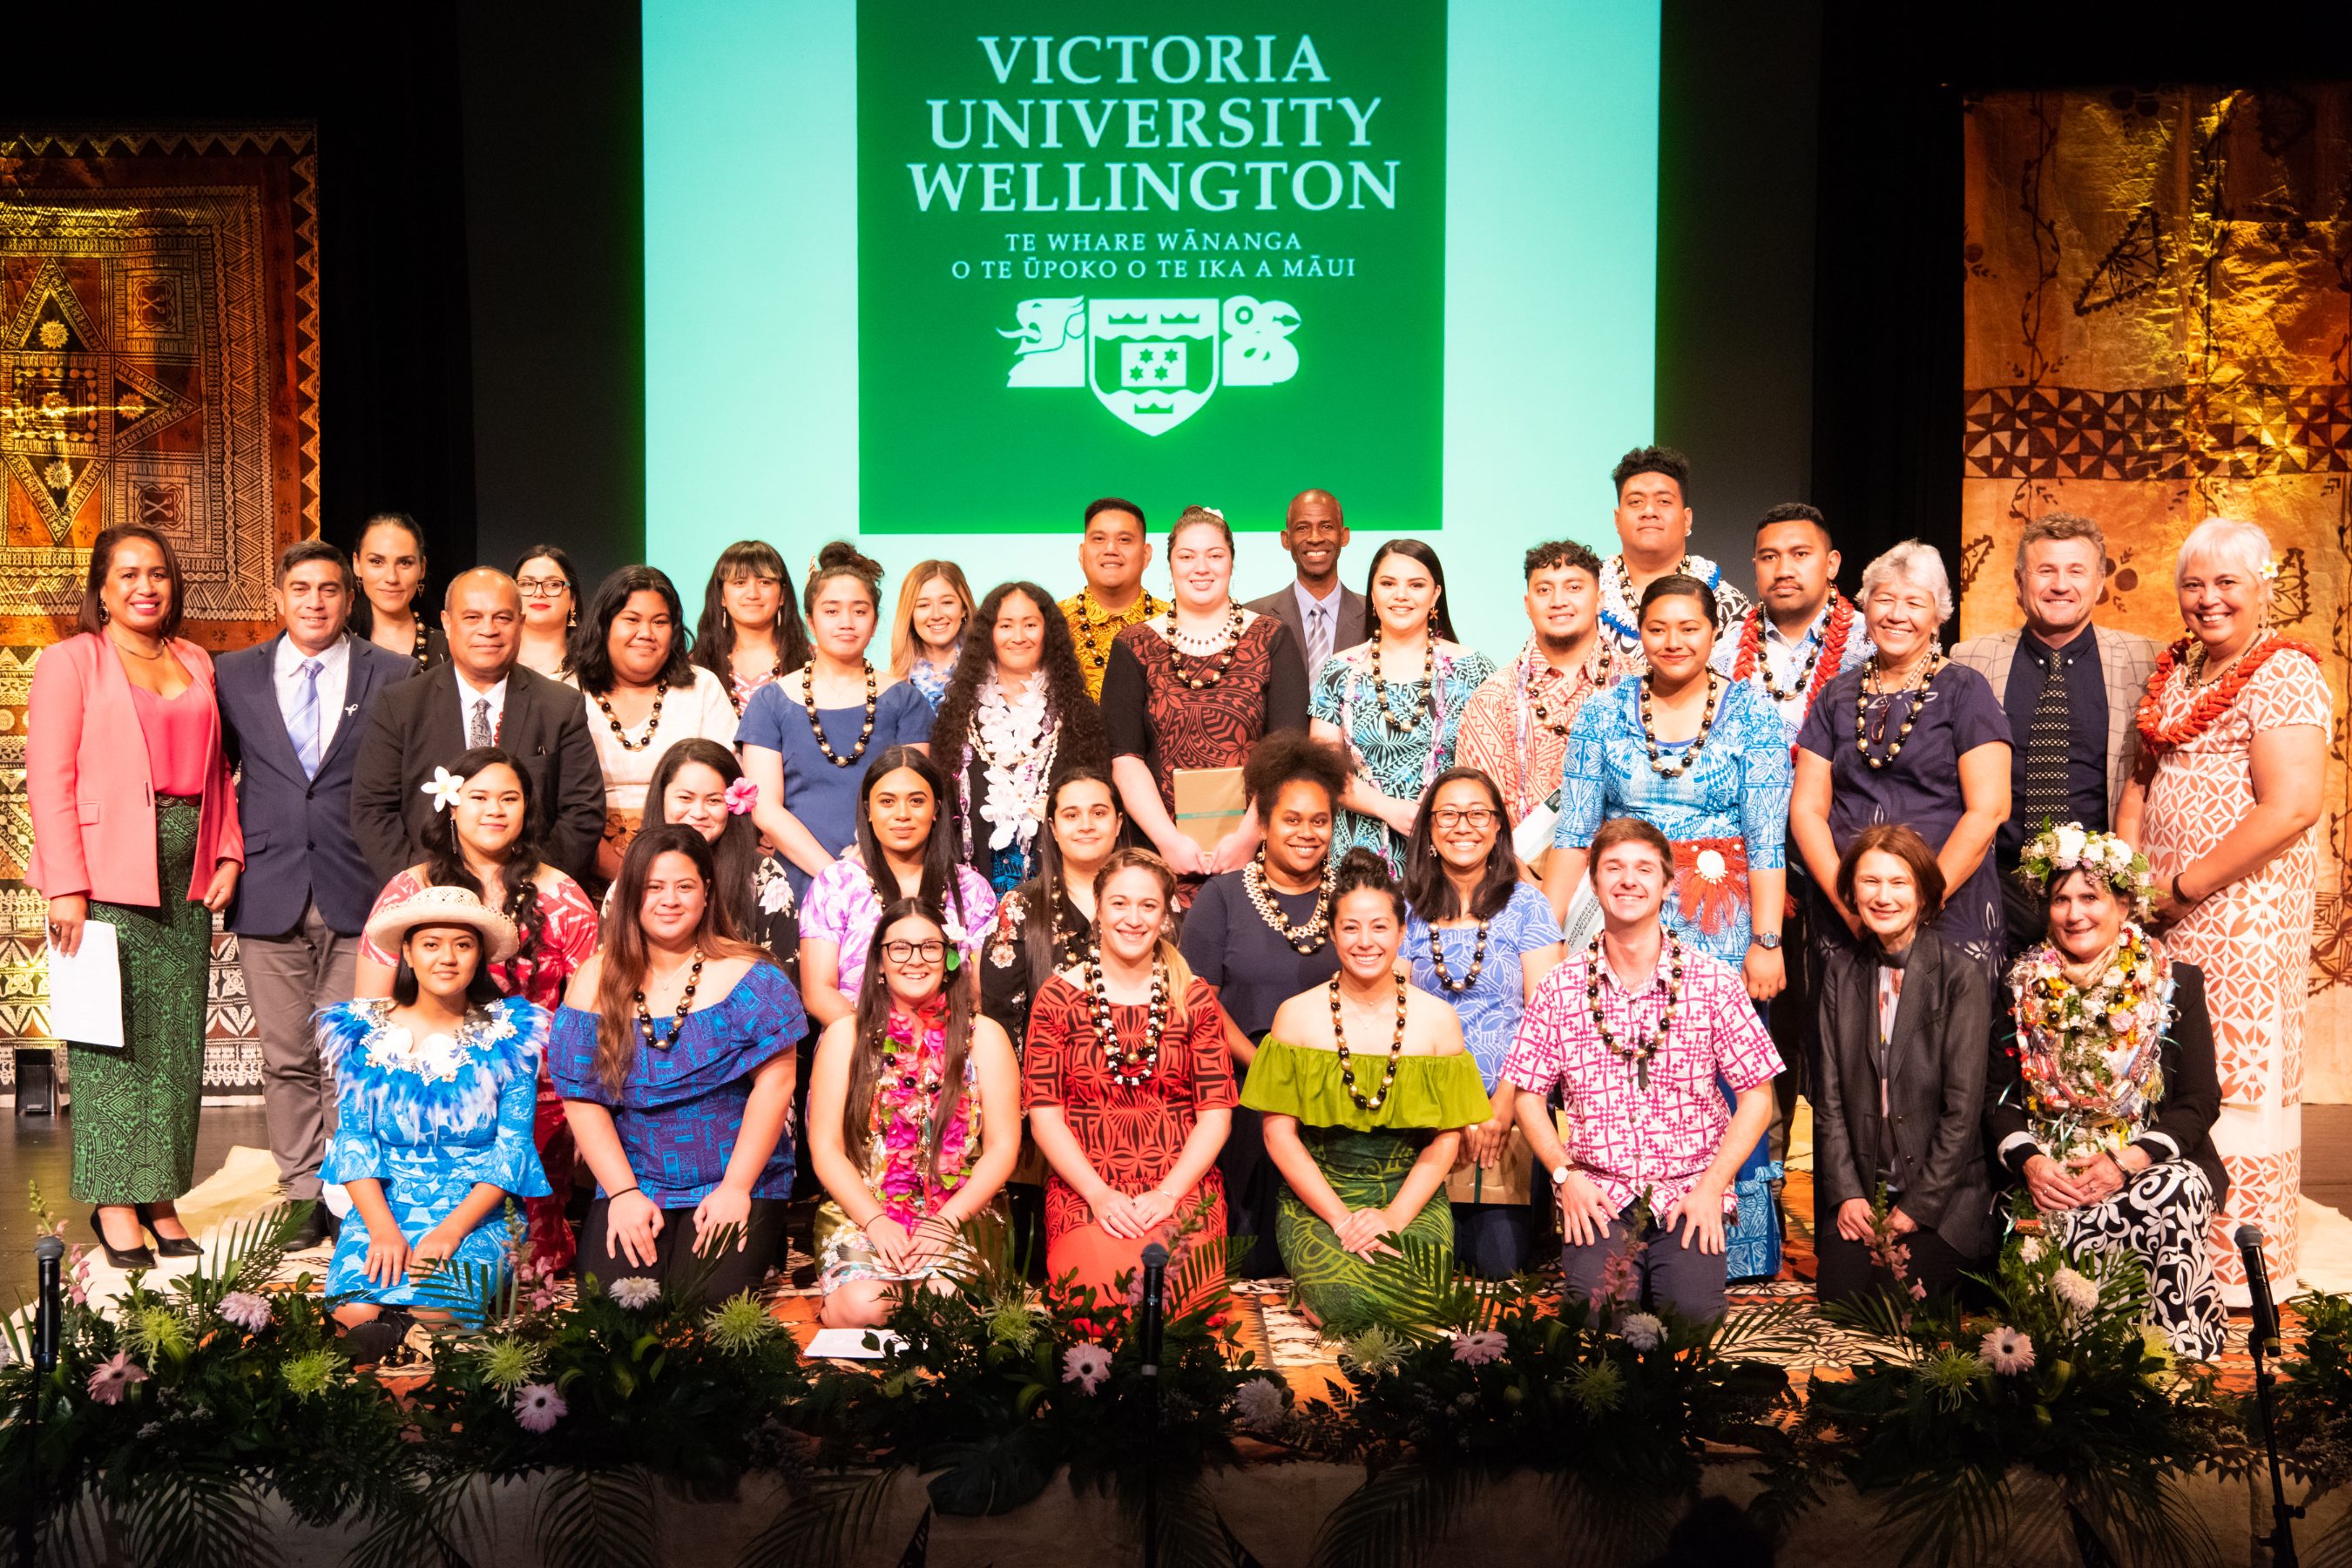 Pasifika graduation May 2019 – Four rows of people in colourful clothing smile together on a stage under a banner that reads Victoria University of Wellington.